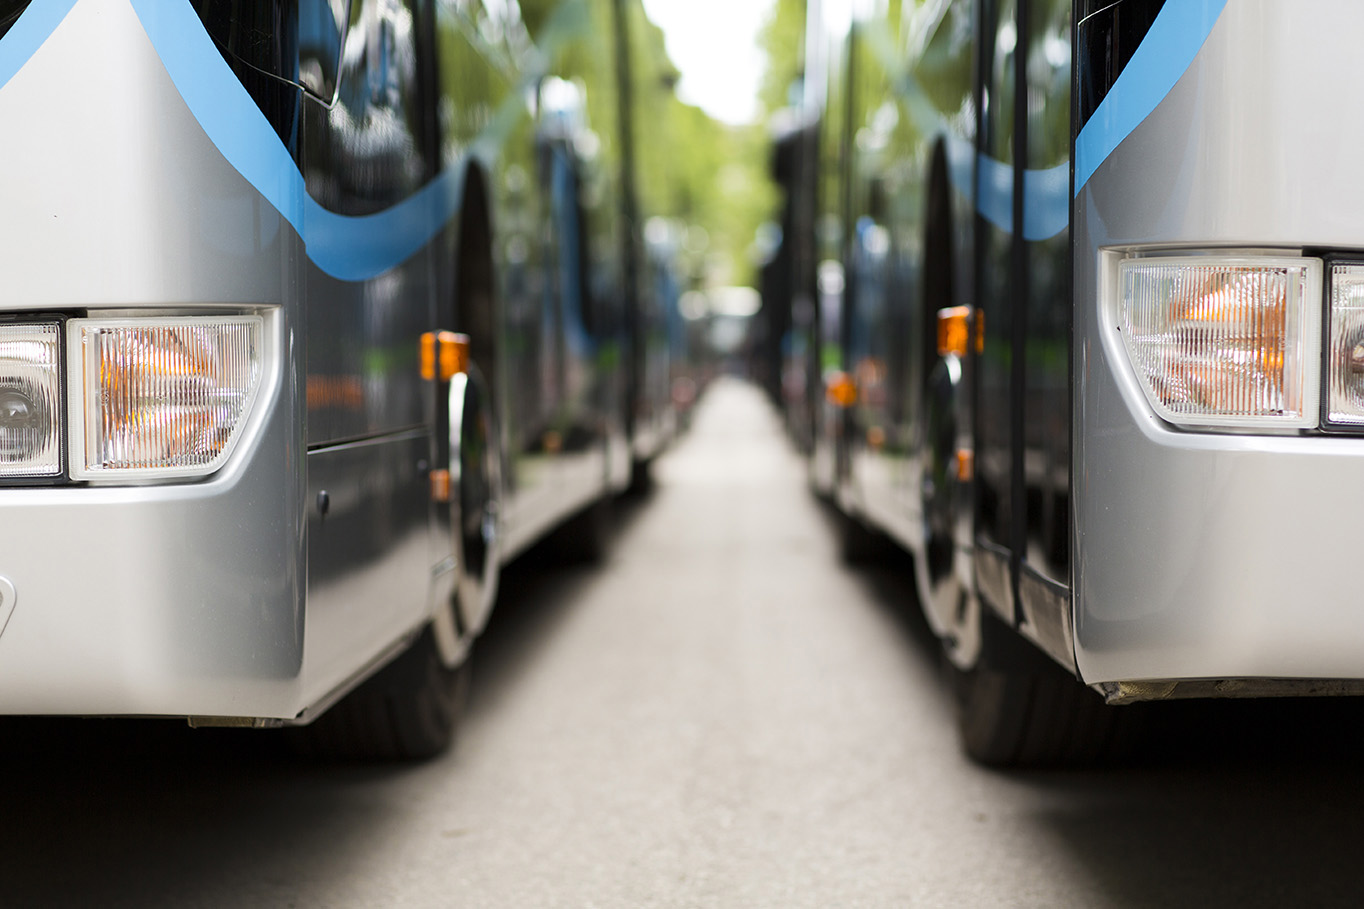 Coach Operators: Reply to TfL's consultation on parking in London